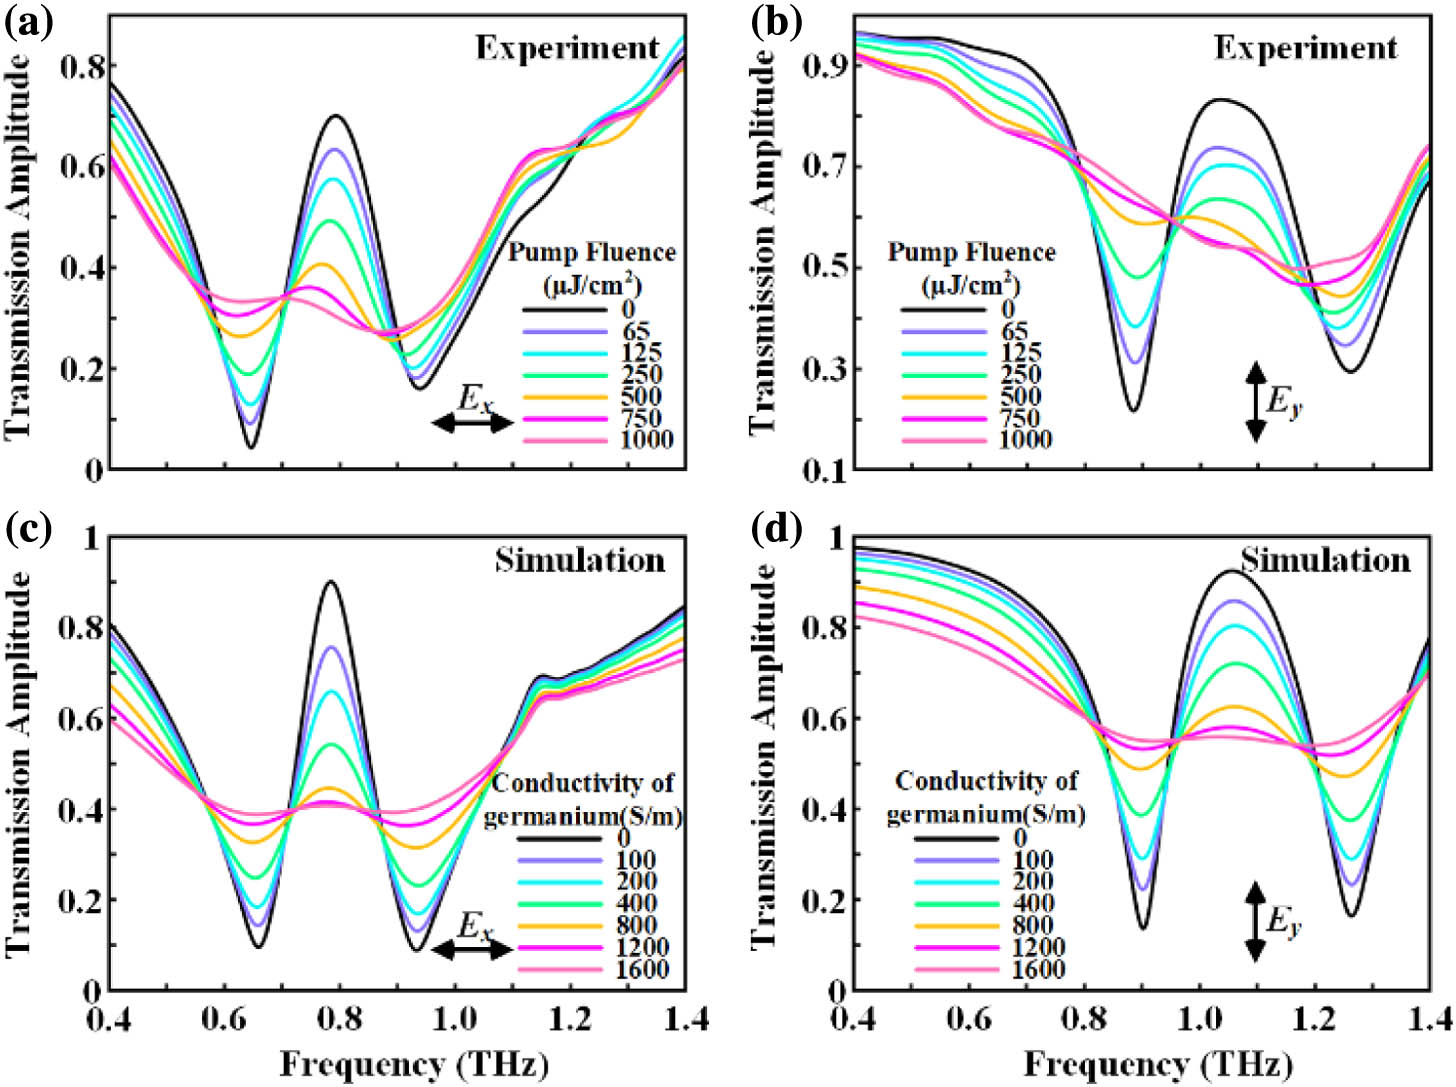 Experimentally measured spectral dispersion of transmission spectra for the polarization-related metadevice in THz (a) x-polarized and (b) y-polarized pumps, considering a series of selected fluences. The corresponding numerically simulated transmission spectra for THz (c) x-polarized and (d) y-polarized light, with the labeled conductivity of the Ge film representing the pump level.